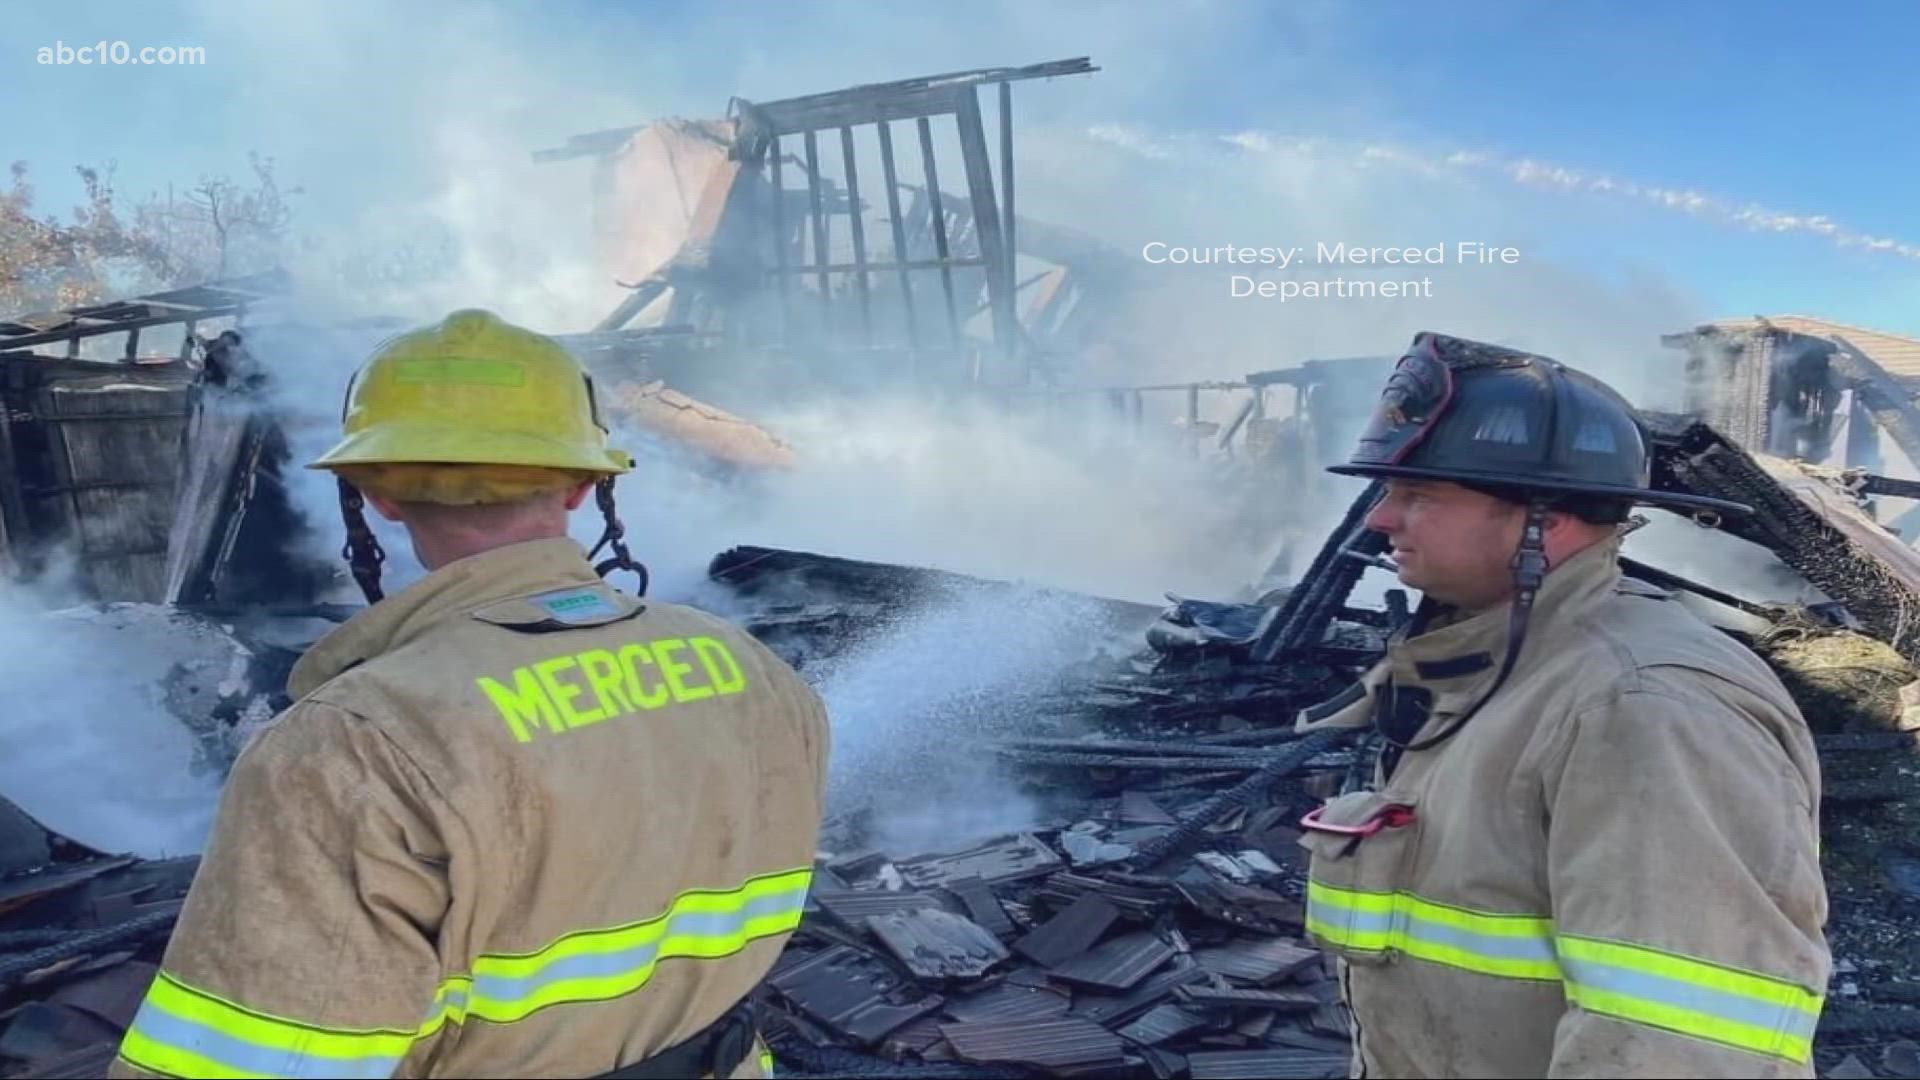 The Merced Fire Department said the fire was reported just after 8 a.m. Monday. One person is in critical condition.